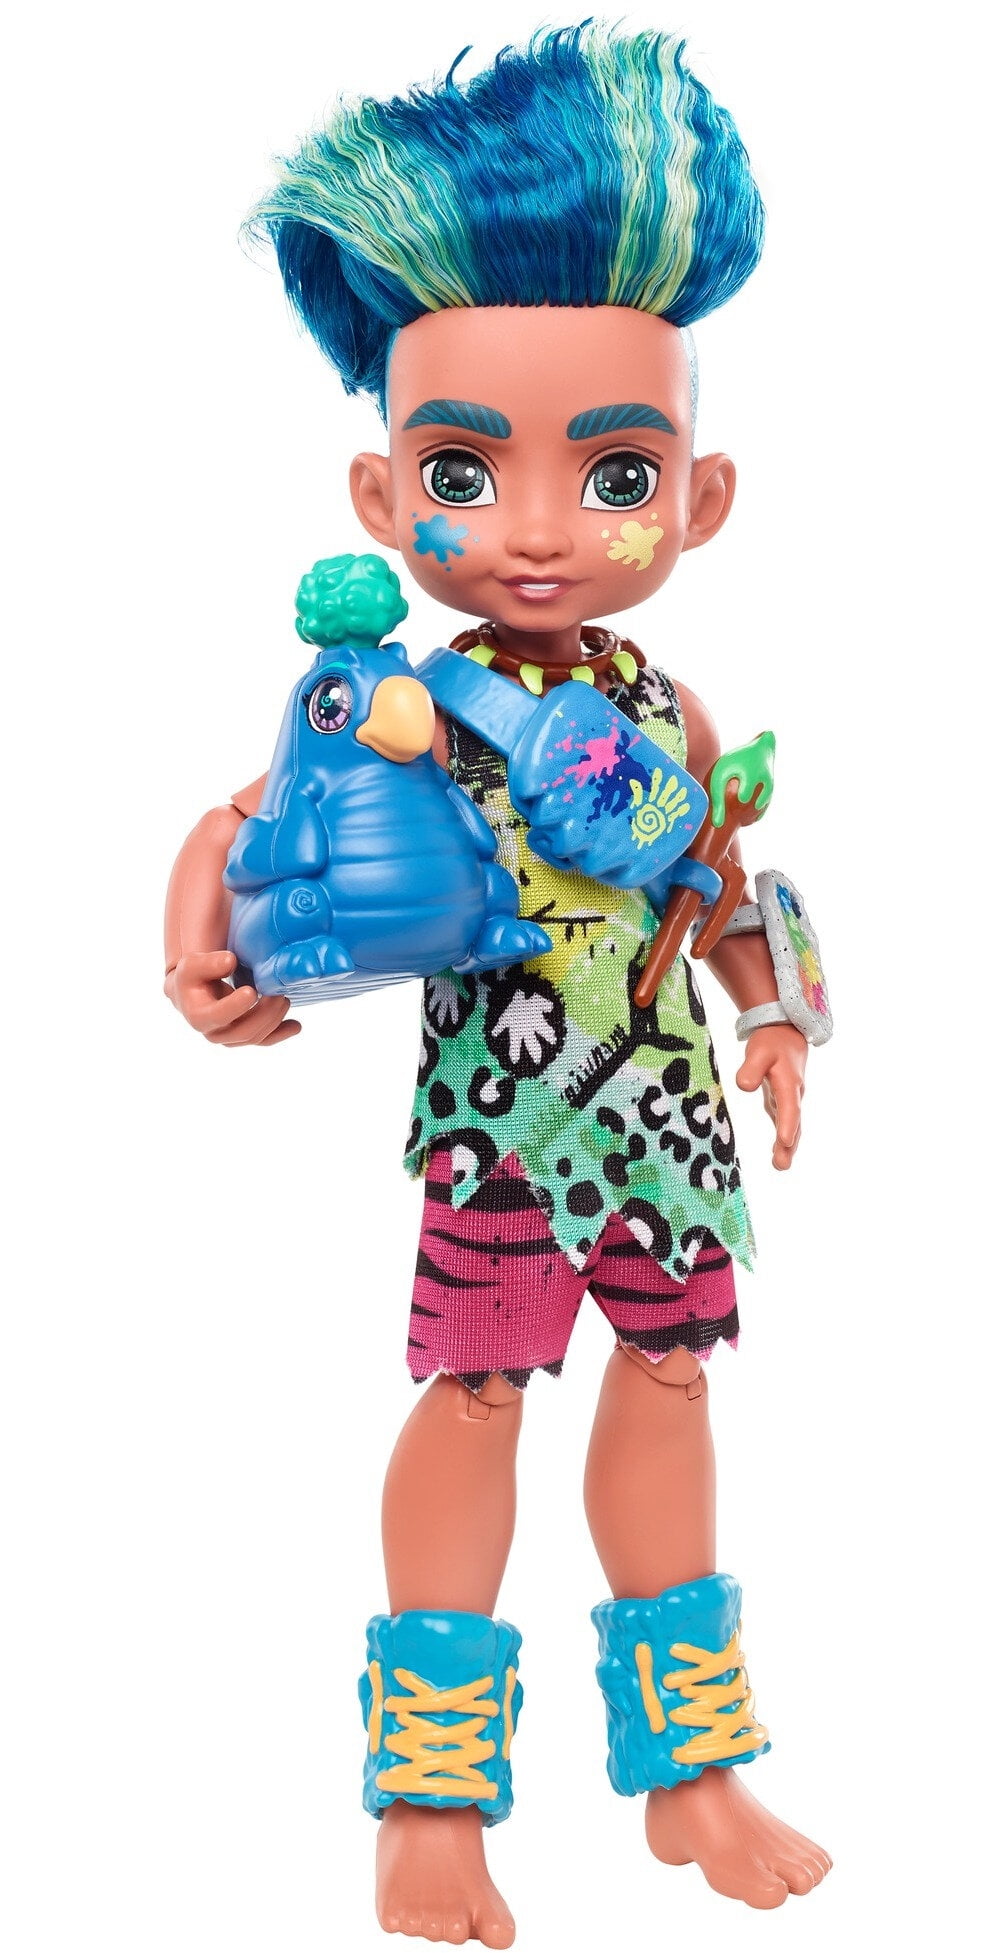 Mattel 2019 Cave Club Prehistoric Kids Slate Doll With Pet Taggy for sale online 